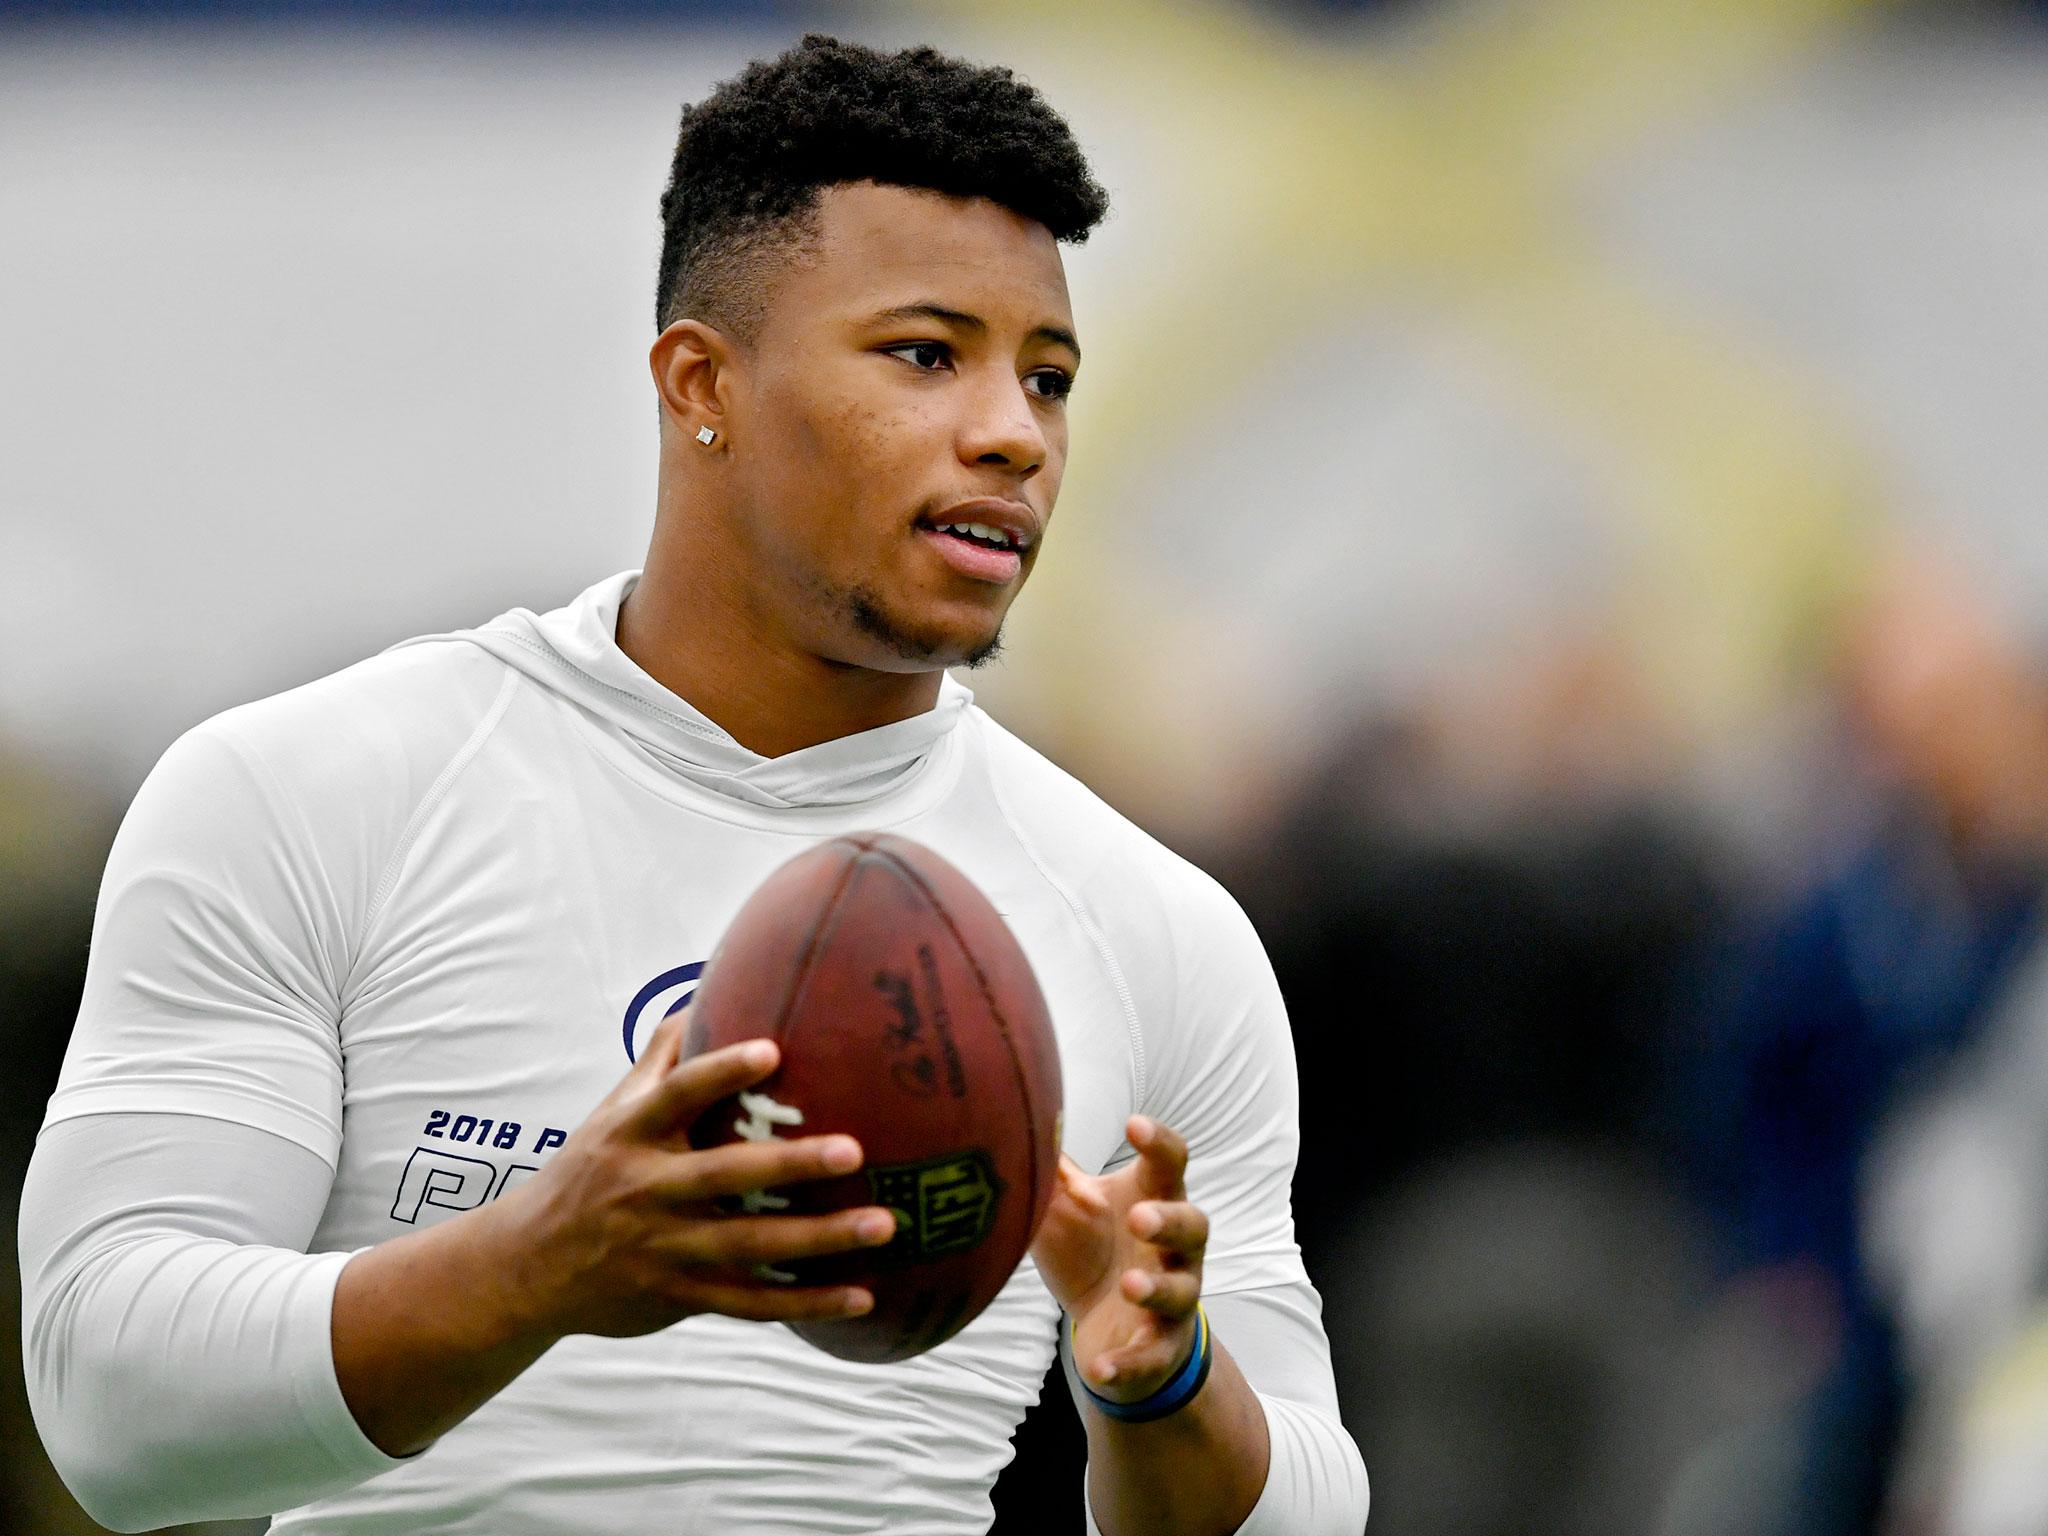 Saquon?Barkley is an immensely-talented runner but how early is too early for an RB?